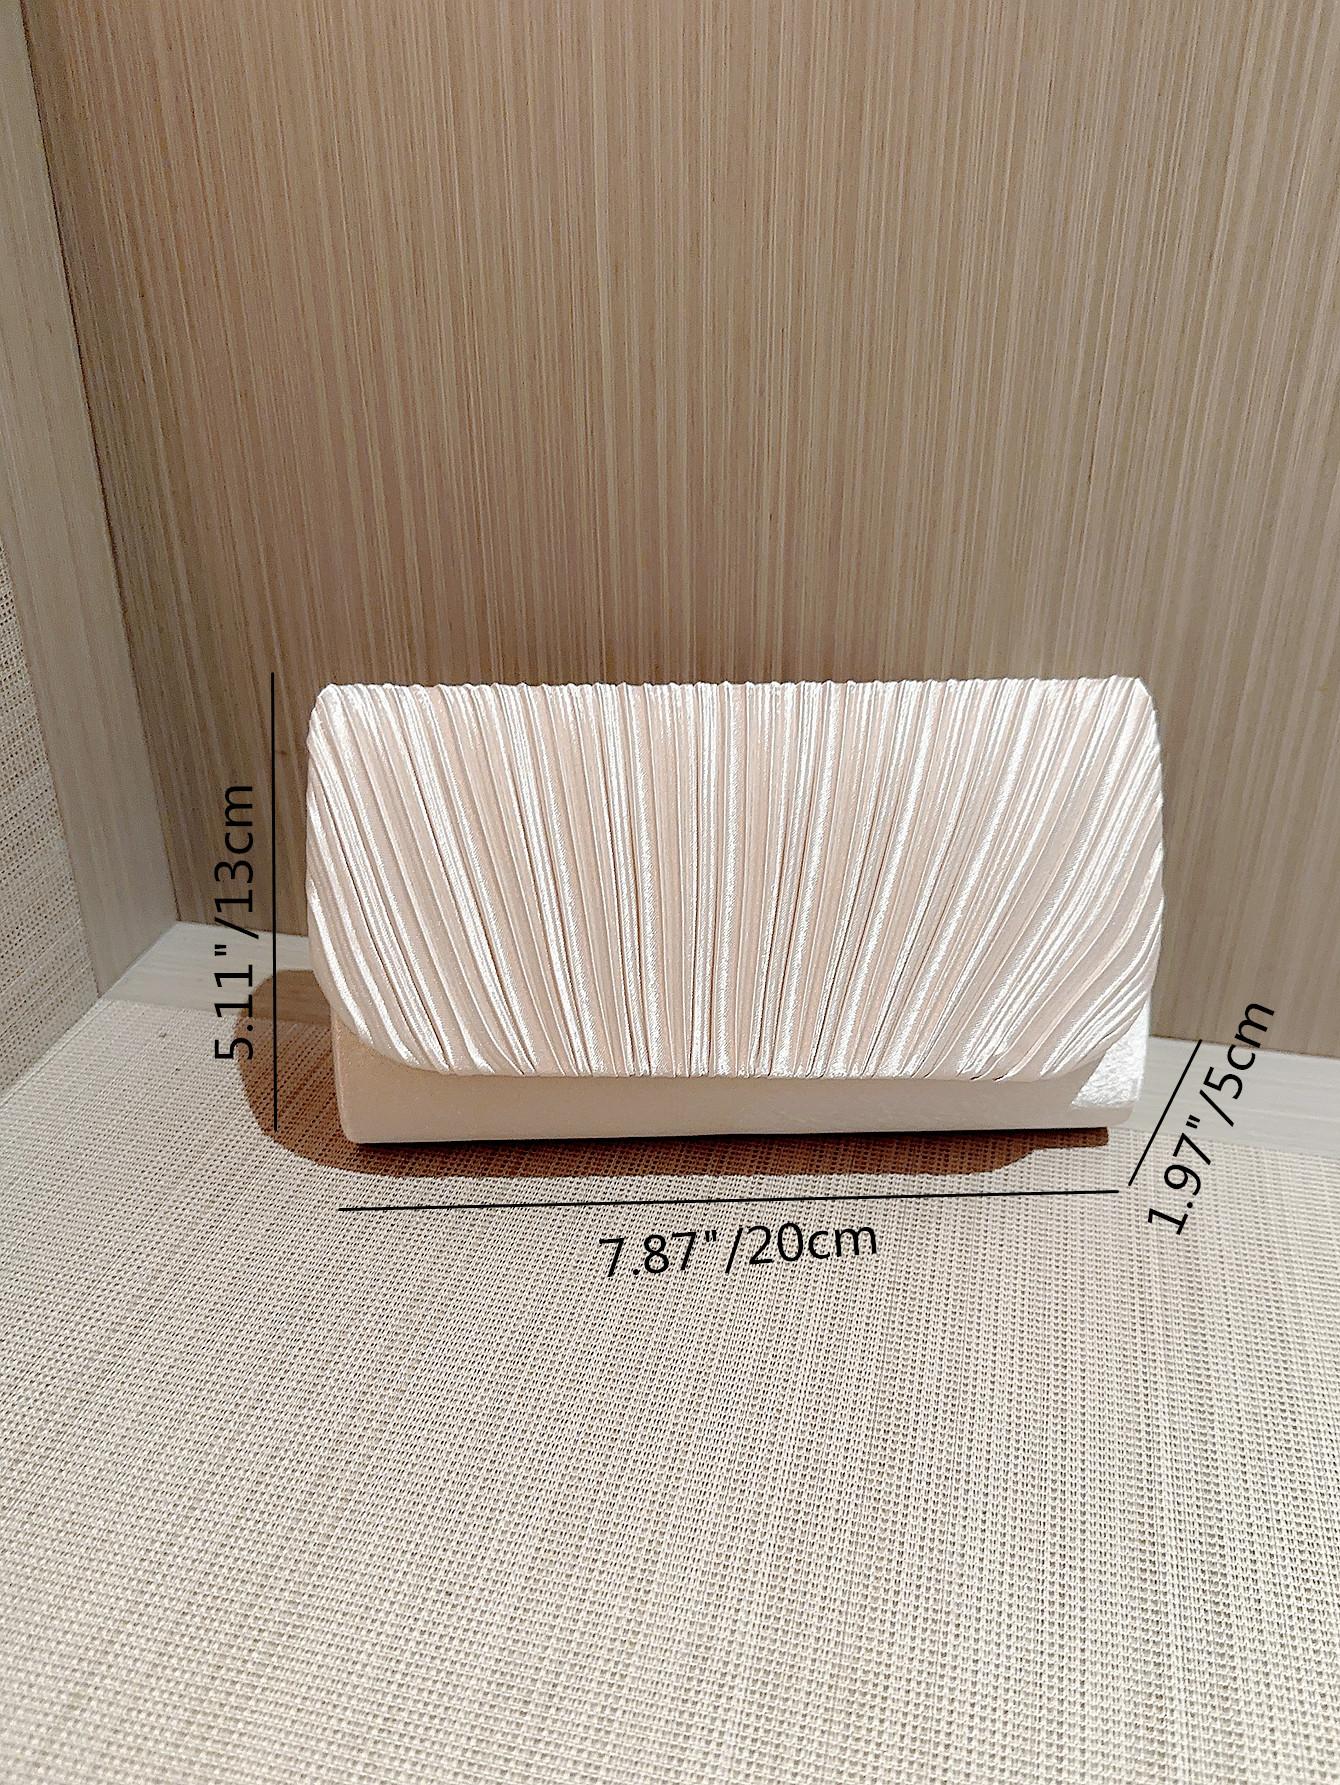 Mini Envelope Bag Ruched Detail Fashionable For Party Pleated Metal Chain Flap Clutch, Elegant Textured Party Purse, Classic Banquet Dinner Evening Bag - Negative Apparel